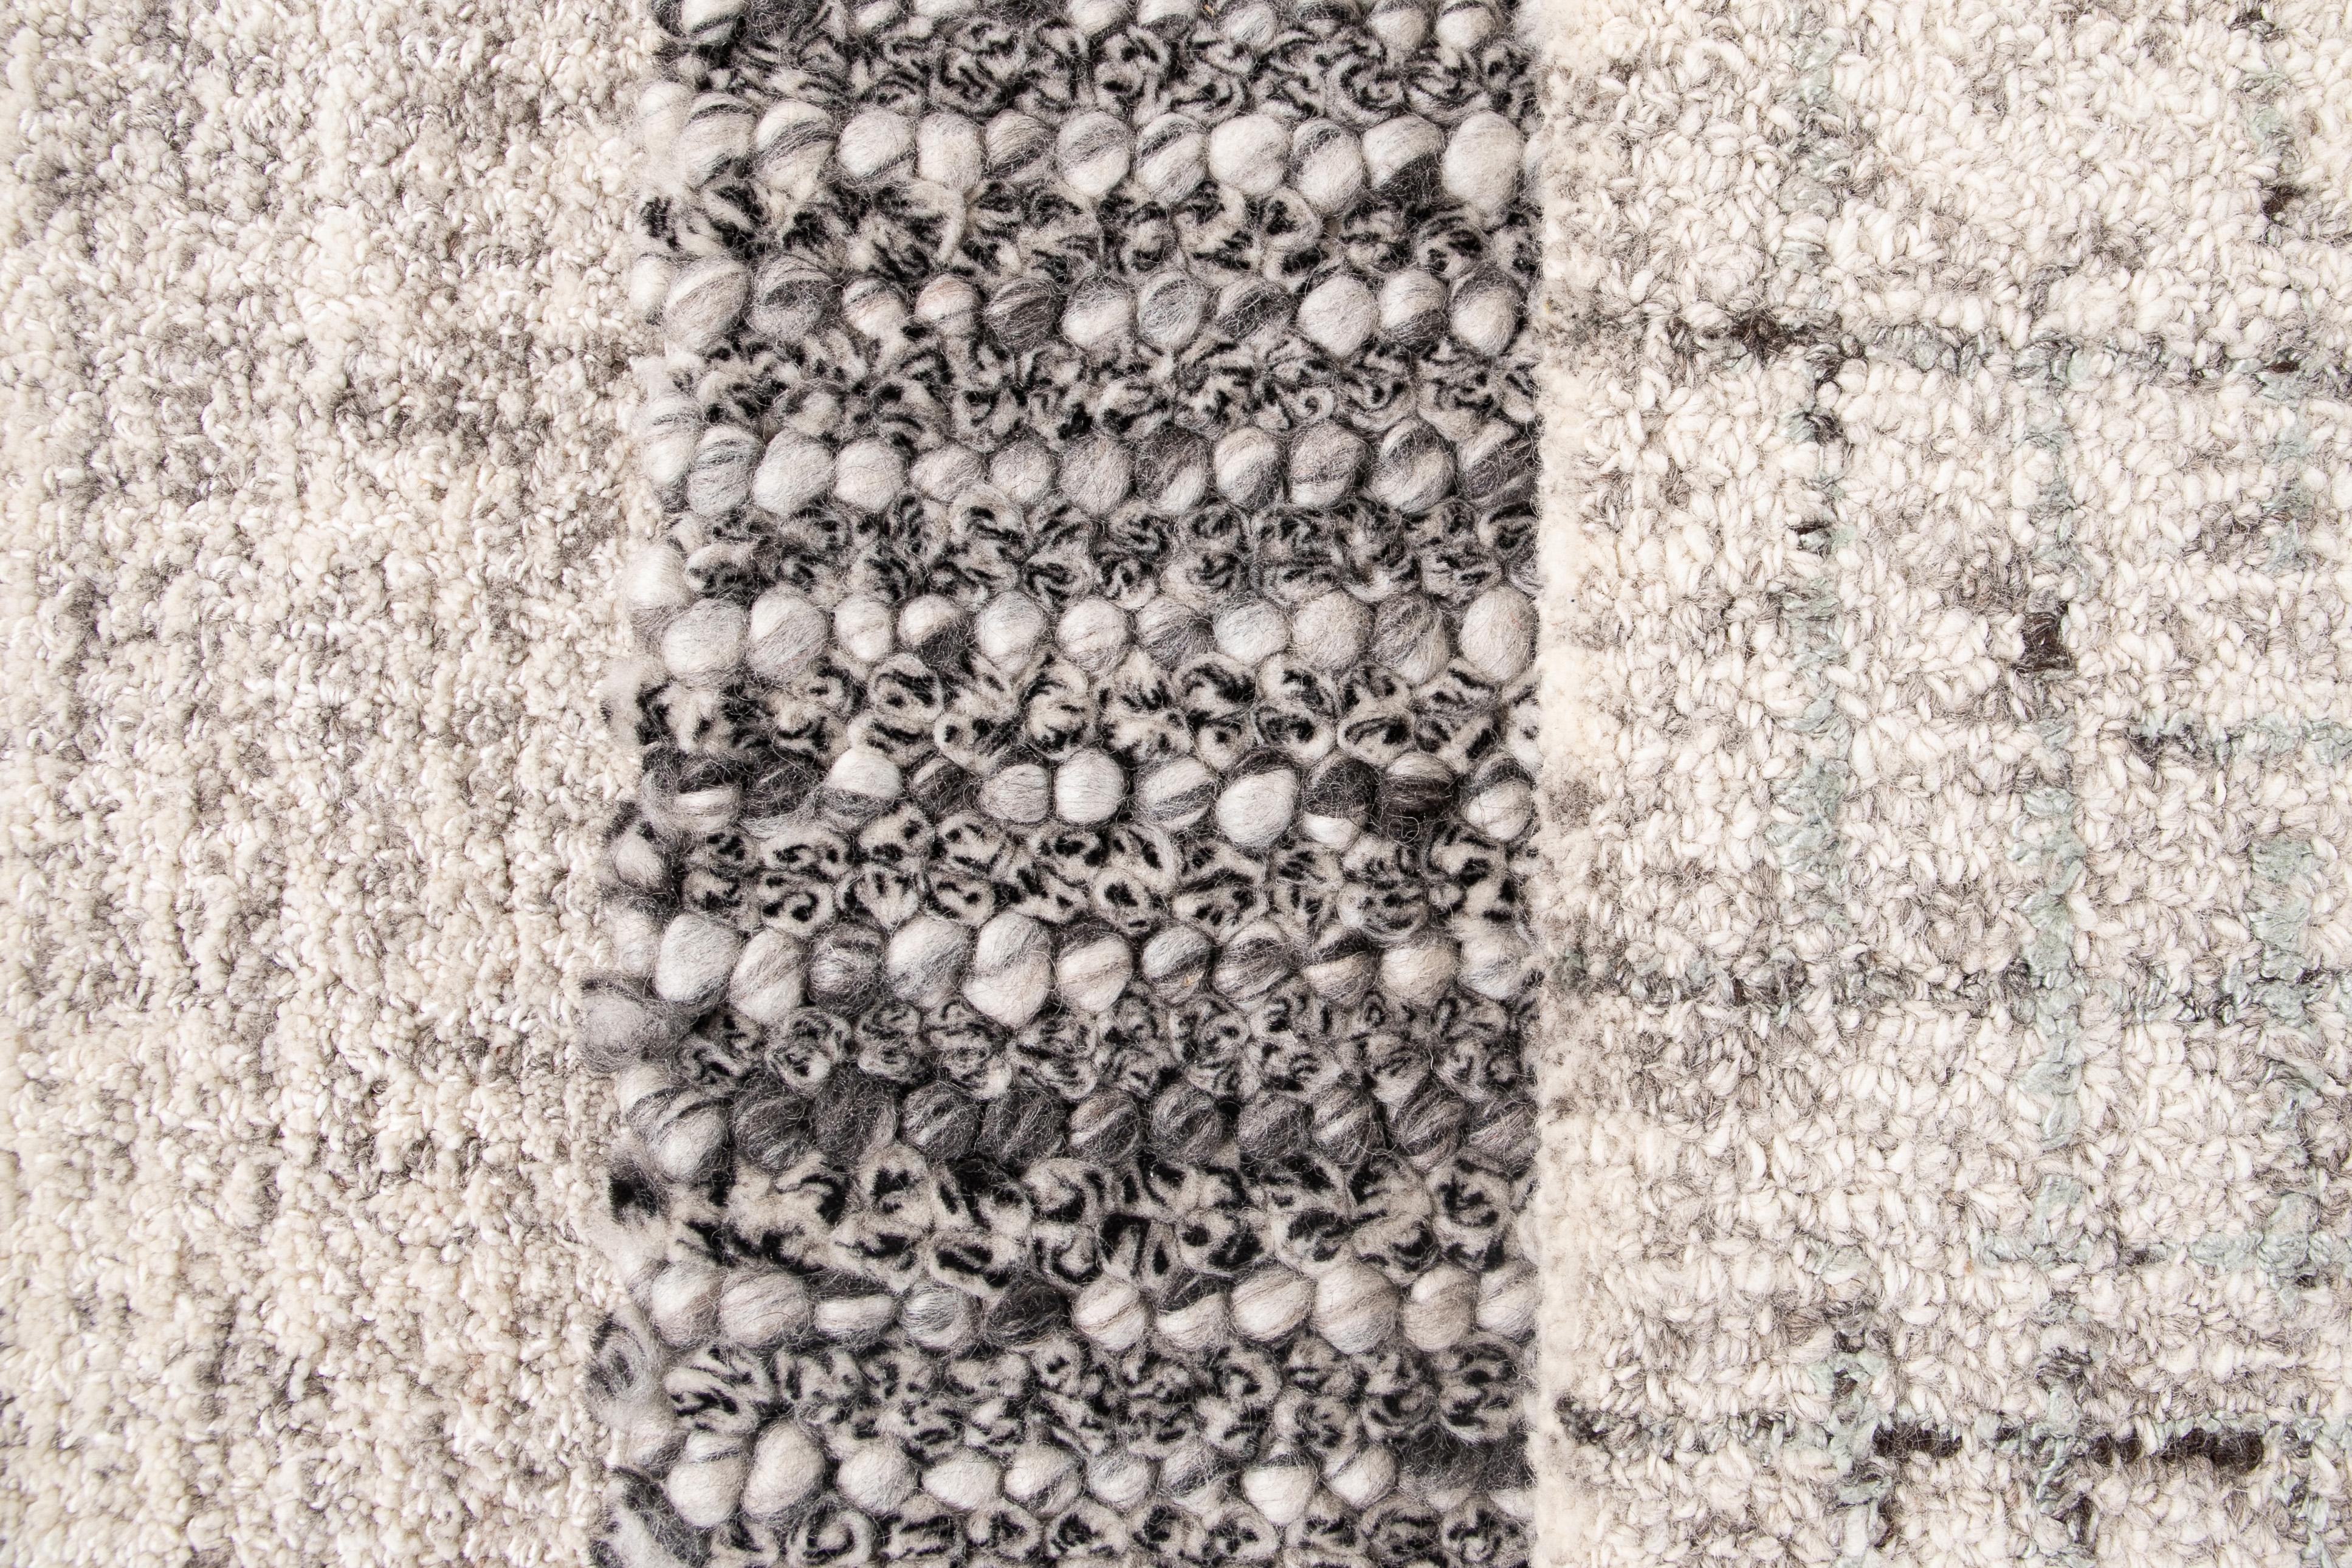 Hand knotted 100% wool custom rug. Custom sizes and colors made-to-order.

Collection: Westport
Material: Wool
Lead time: Approximate 12-15 weeks depending on size
Available colors: As shown.

Price listed is for an 8' x 10' rug.